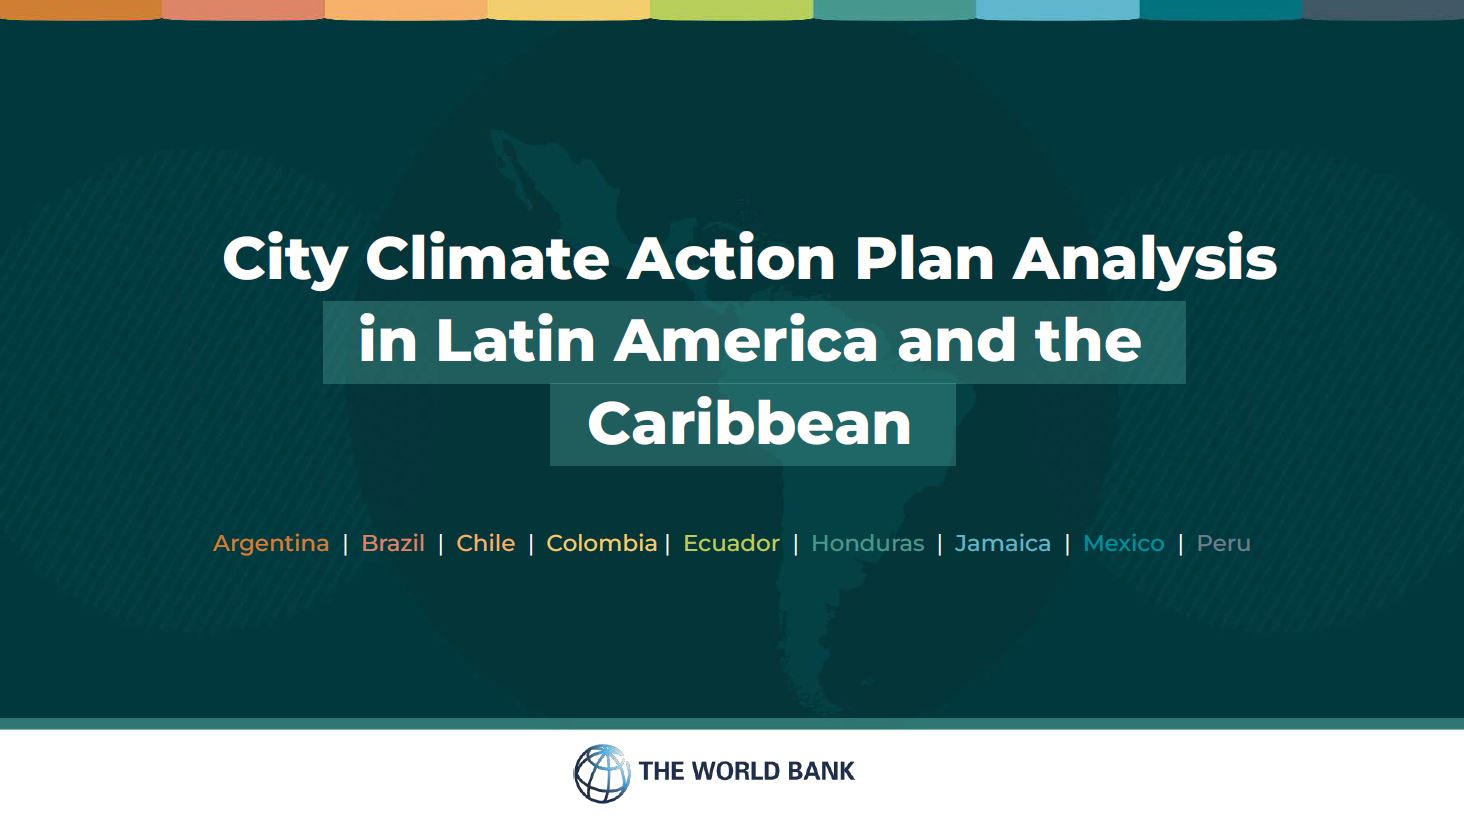 City Climate Action Plan Analysis in Latin America and the Caribbean